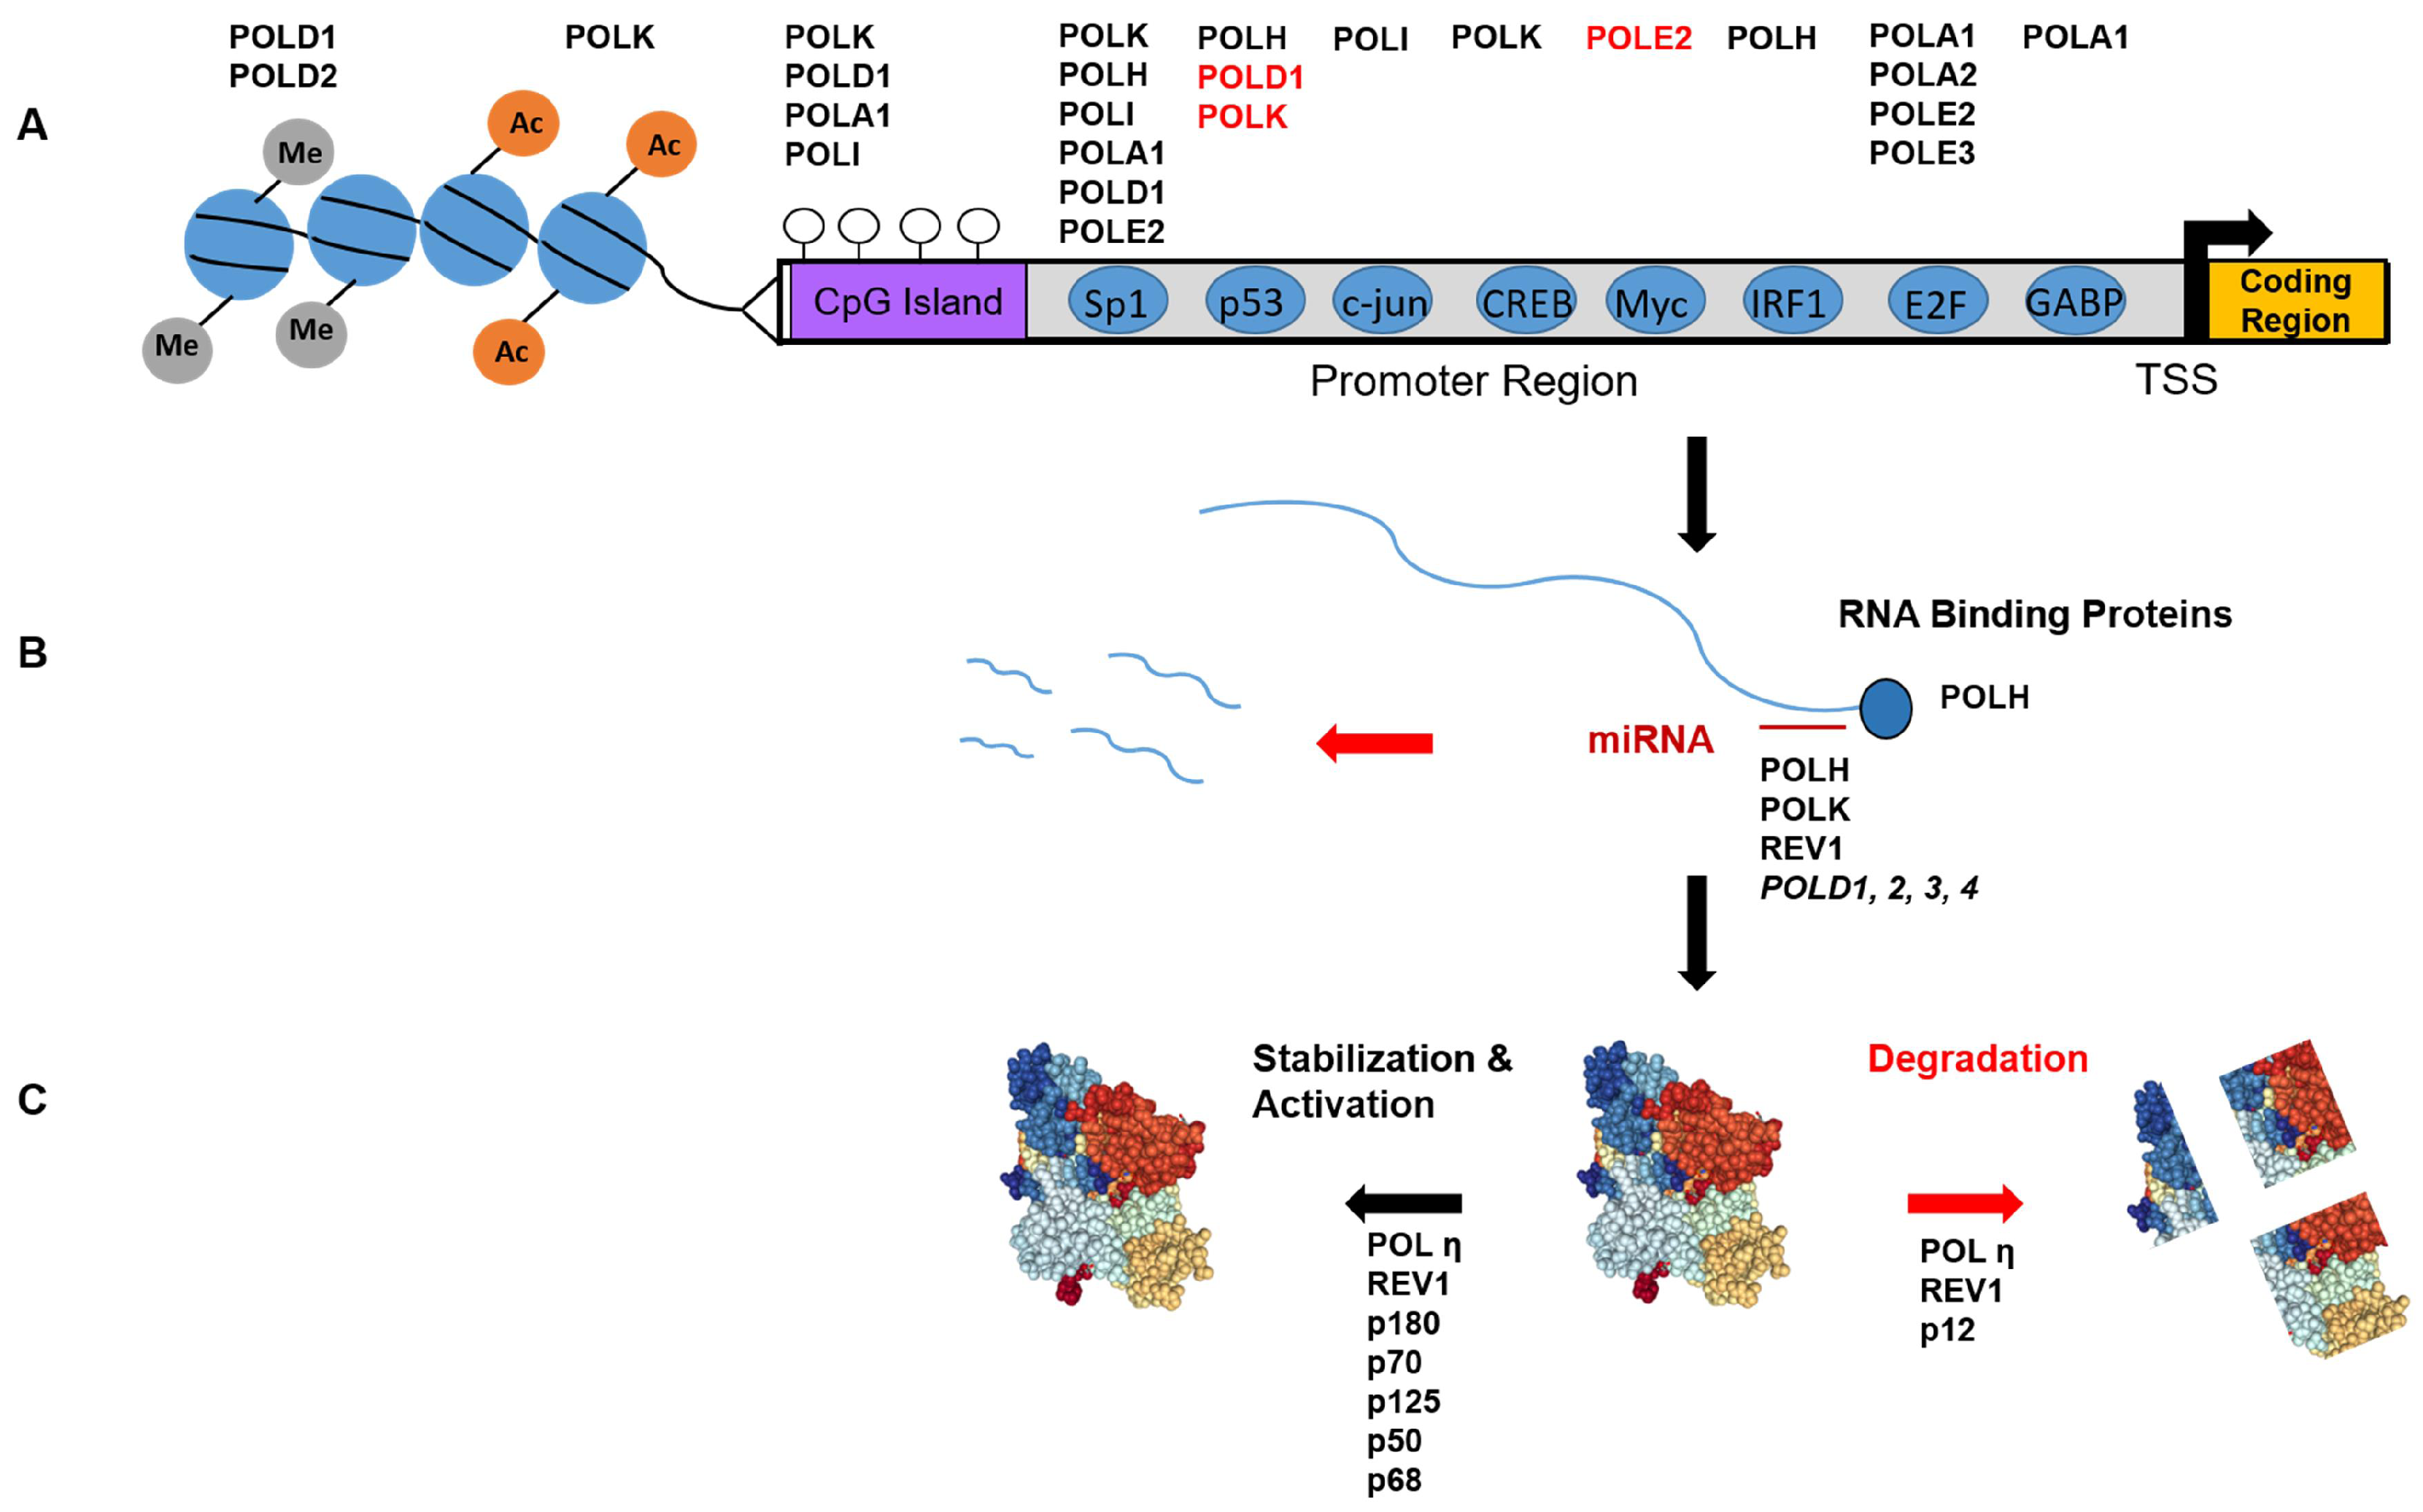 | Free | Maintenance of Genome Integrity: How Mammalian Cells Orchestrate Genome Duplication by Coordinating Replicative and Specialized DNA Polymerases